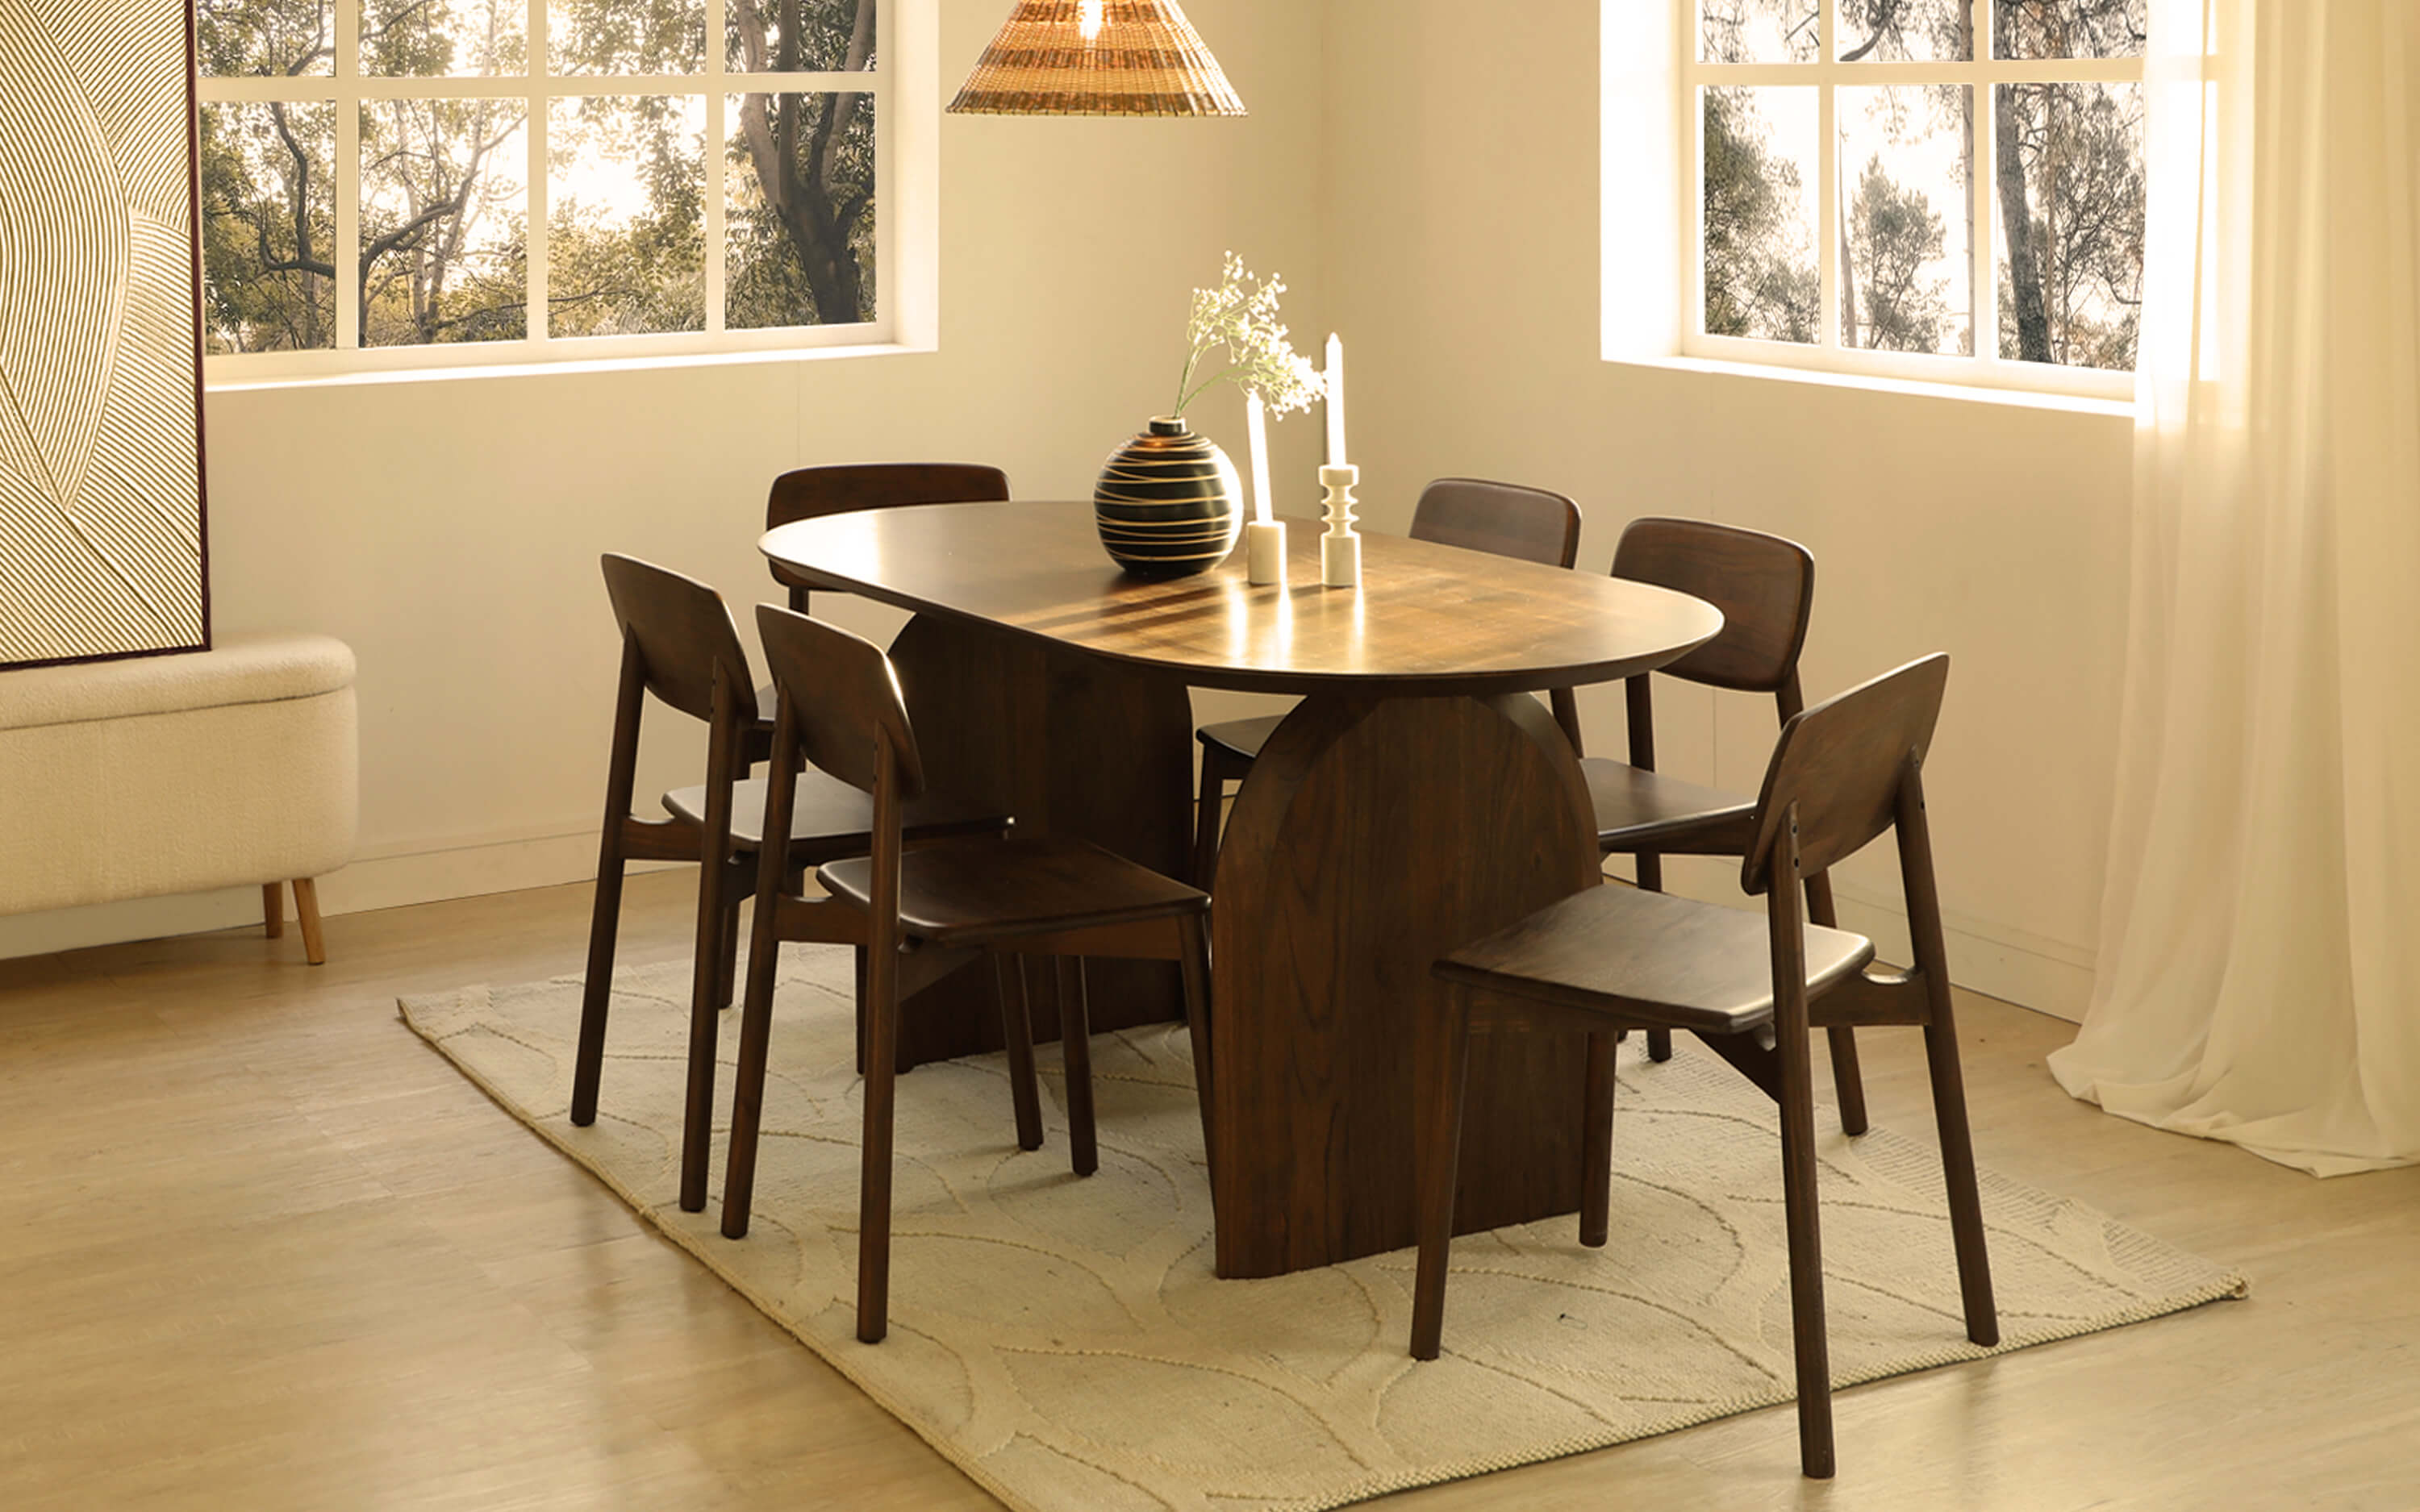 Coordinating Dining Chairs with the dining table Harmony in Design